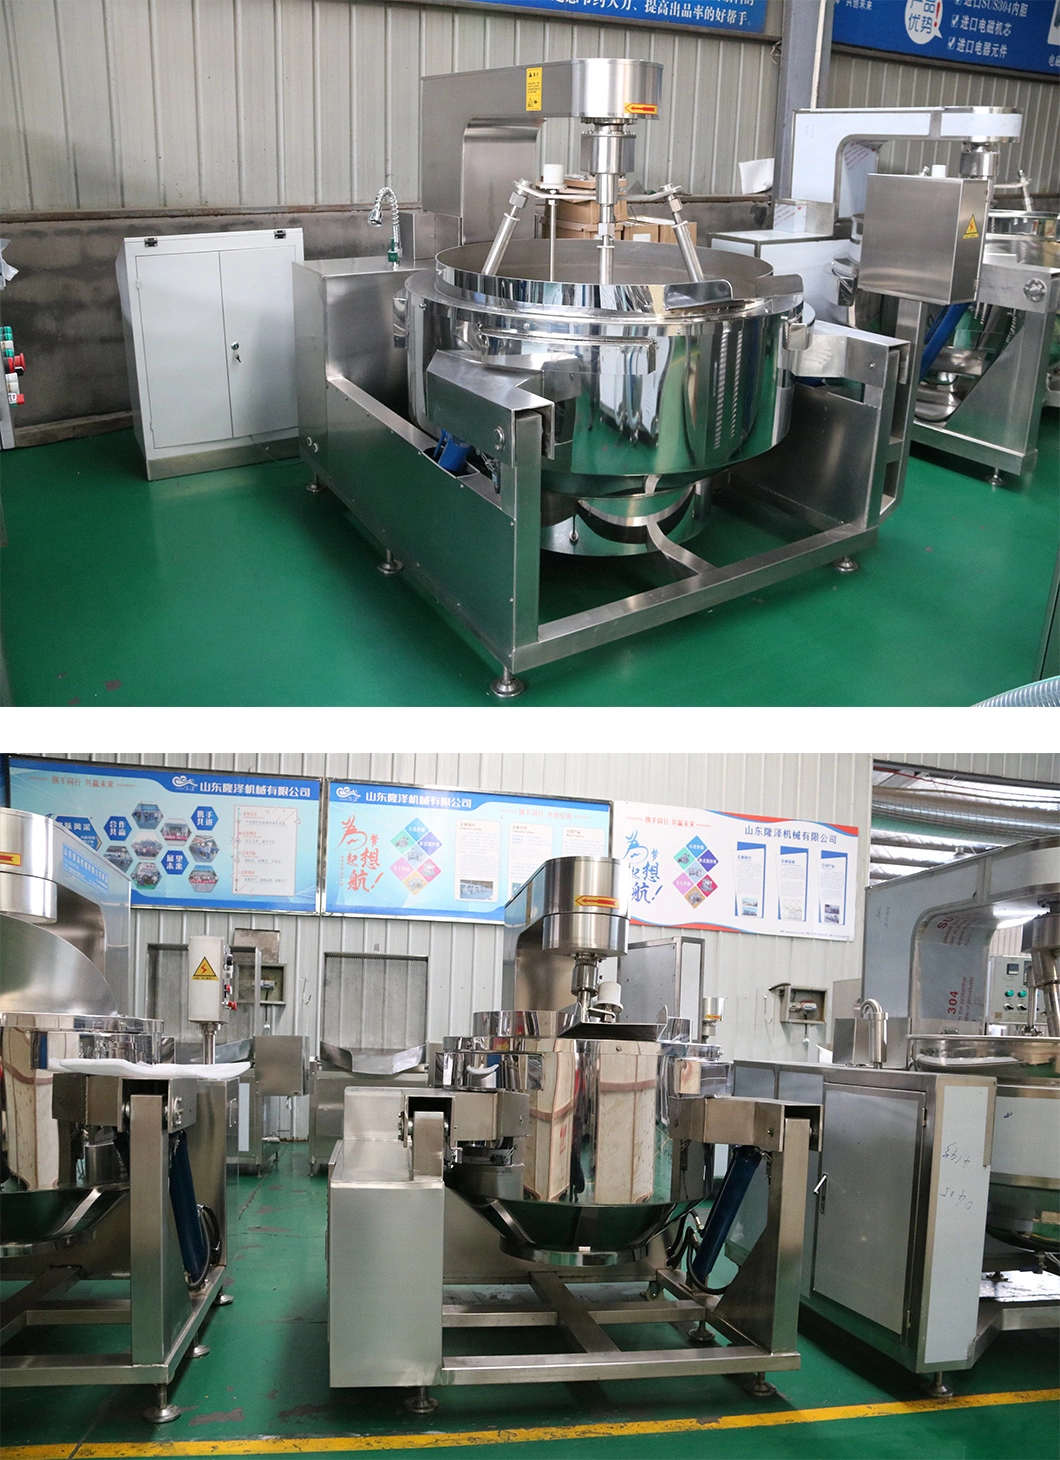 China Big Industrial Commercial Automatic Multi Planetary Tilting Curry Chili Bean Paste Mixing Making Electric Gas Steam Wild Rice Stuffing Cook Wok